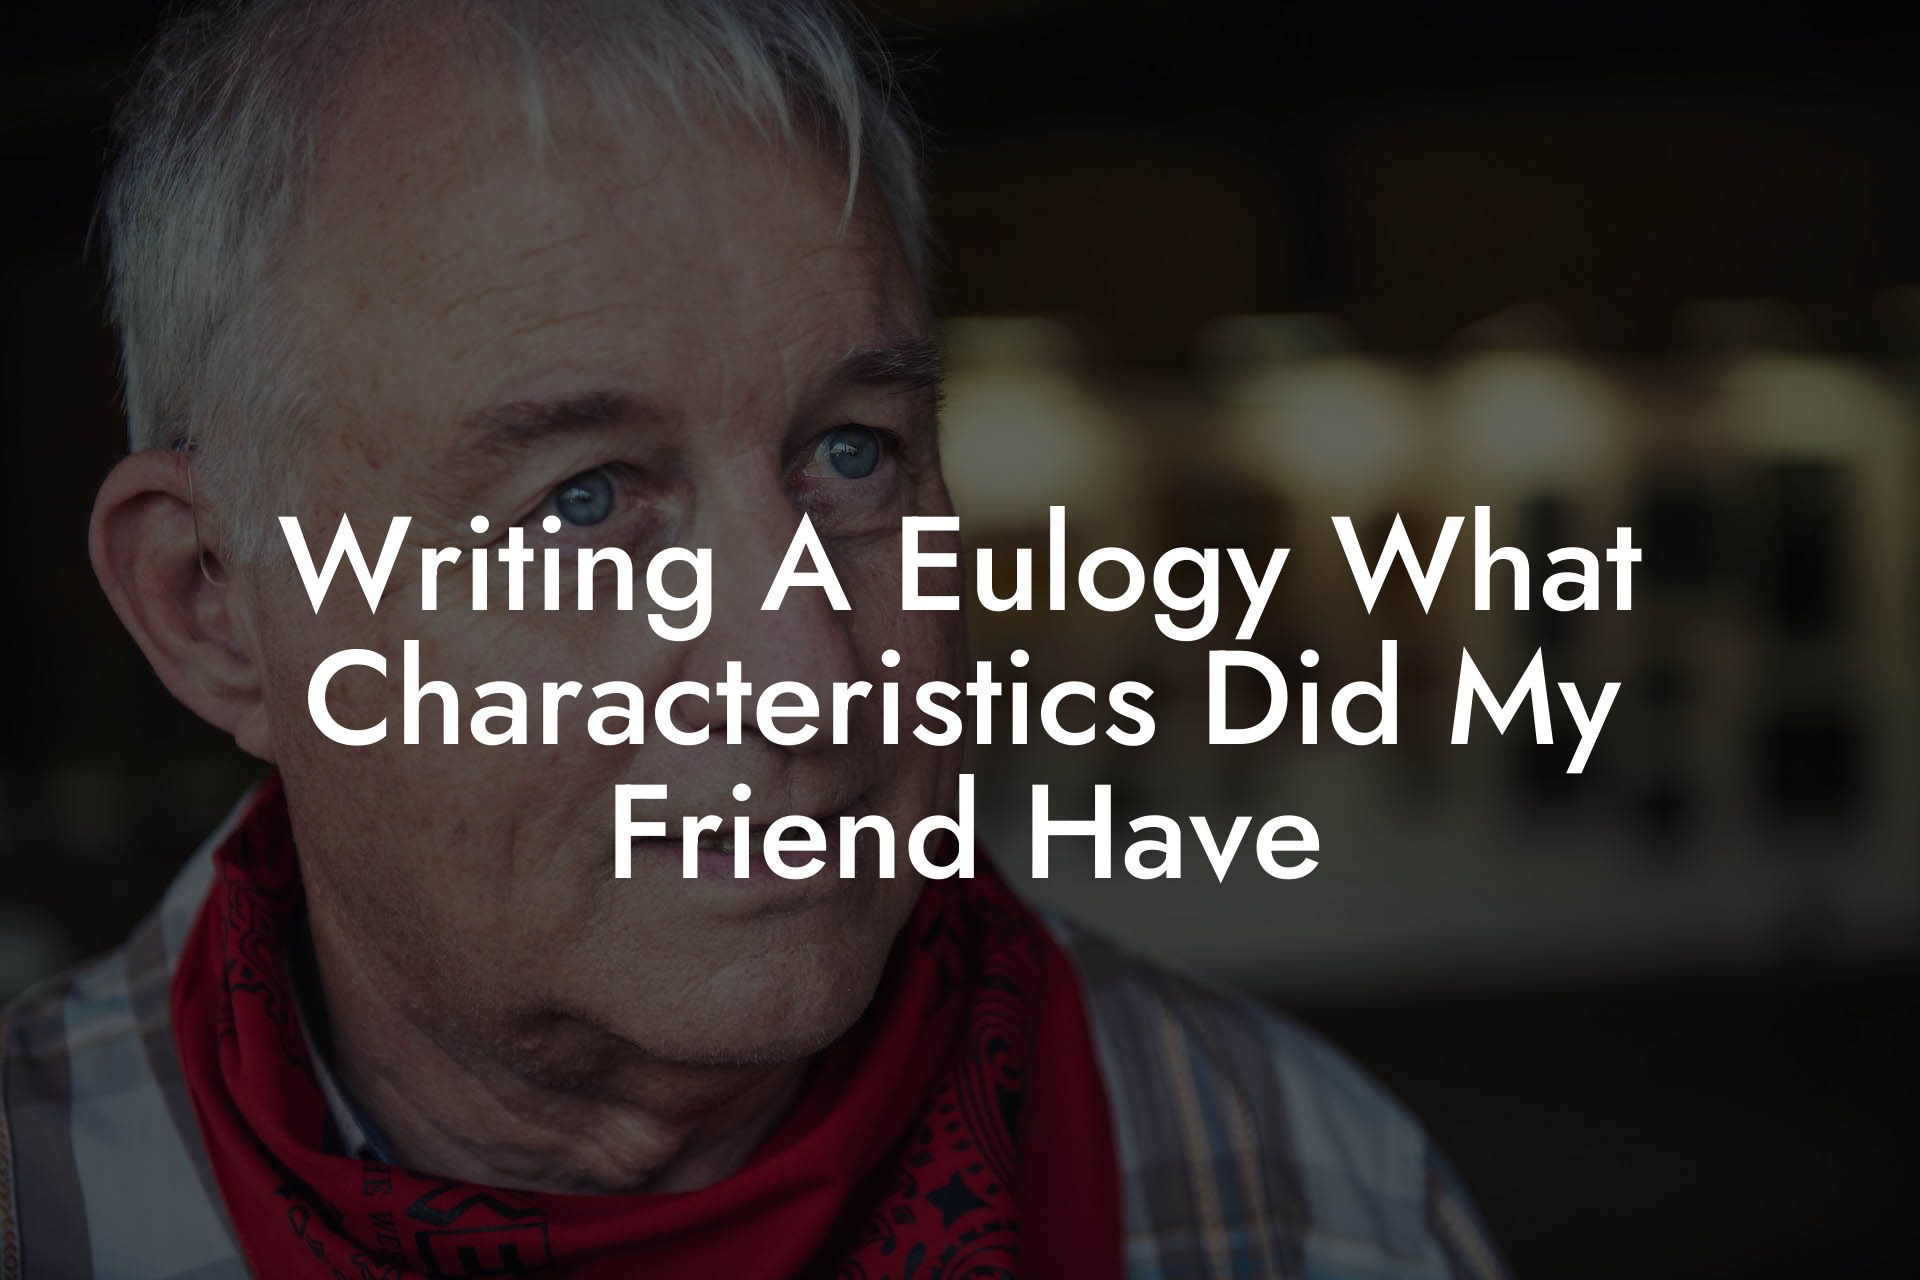 Writing A Eulogy What Characteristics Did My Friend Have